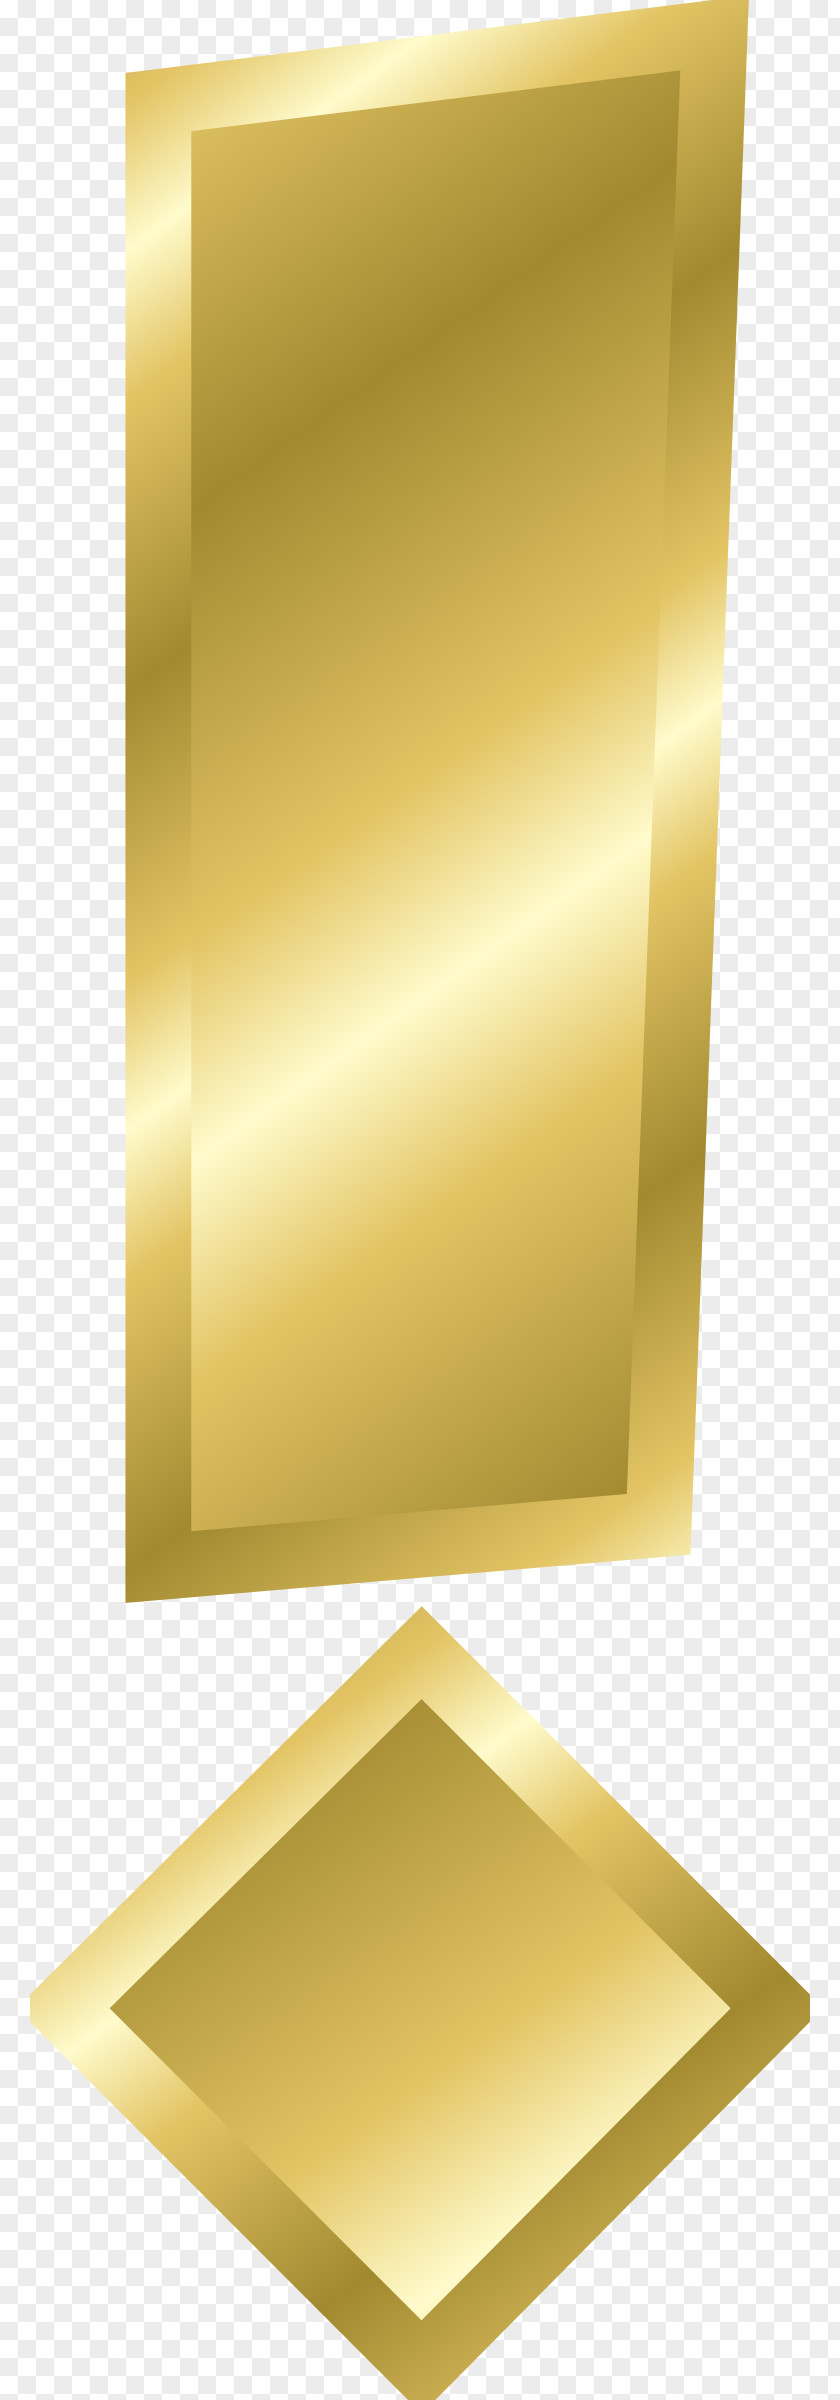 Gold Letters Exclamation Mark Letter Interjection Alphabet PNG